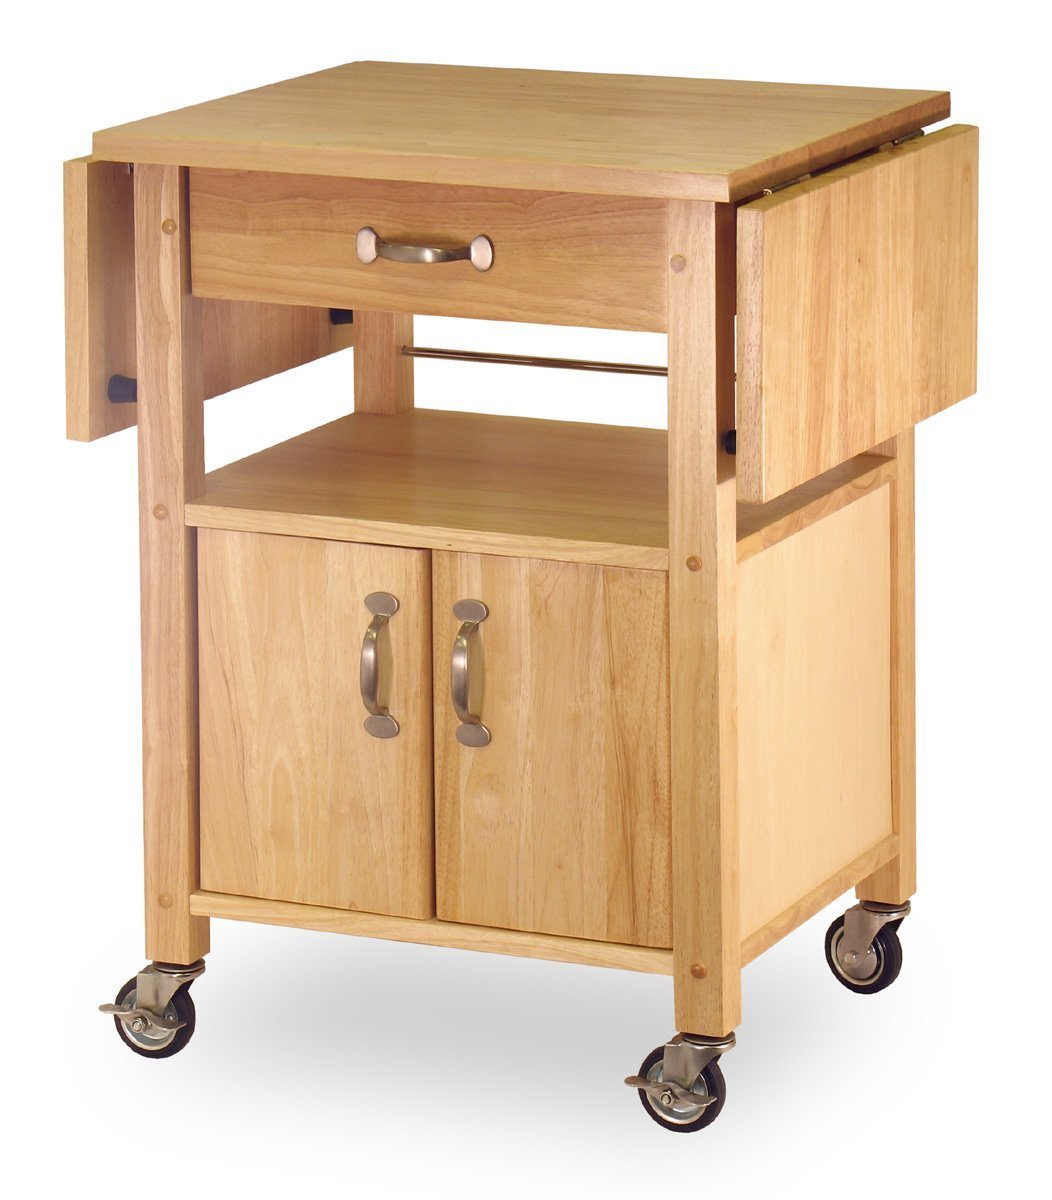 5 Best Winsome Wood Kitchen Carts - Nice choice for a small kitchen